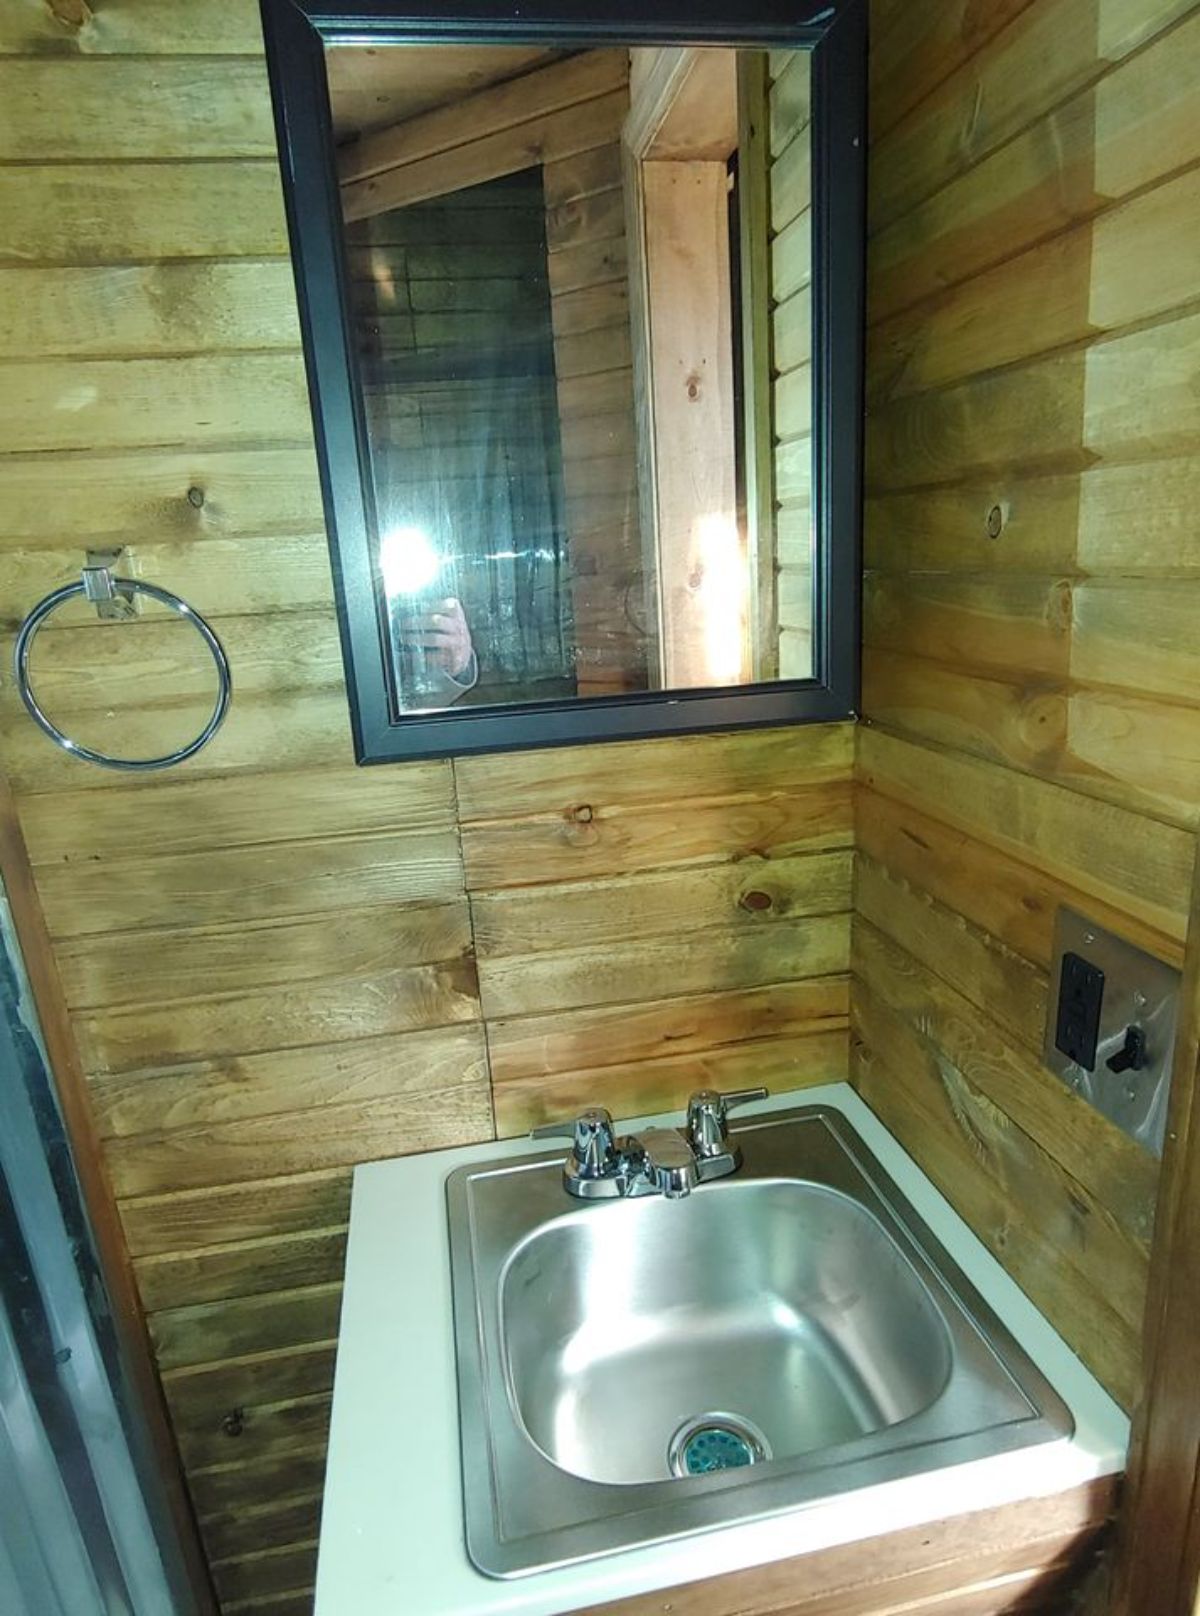 Sink of tiny home